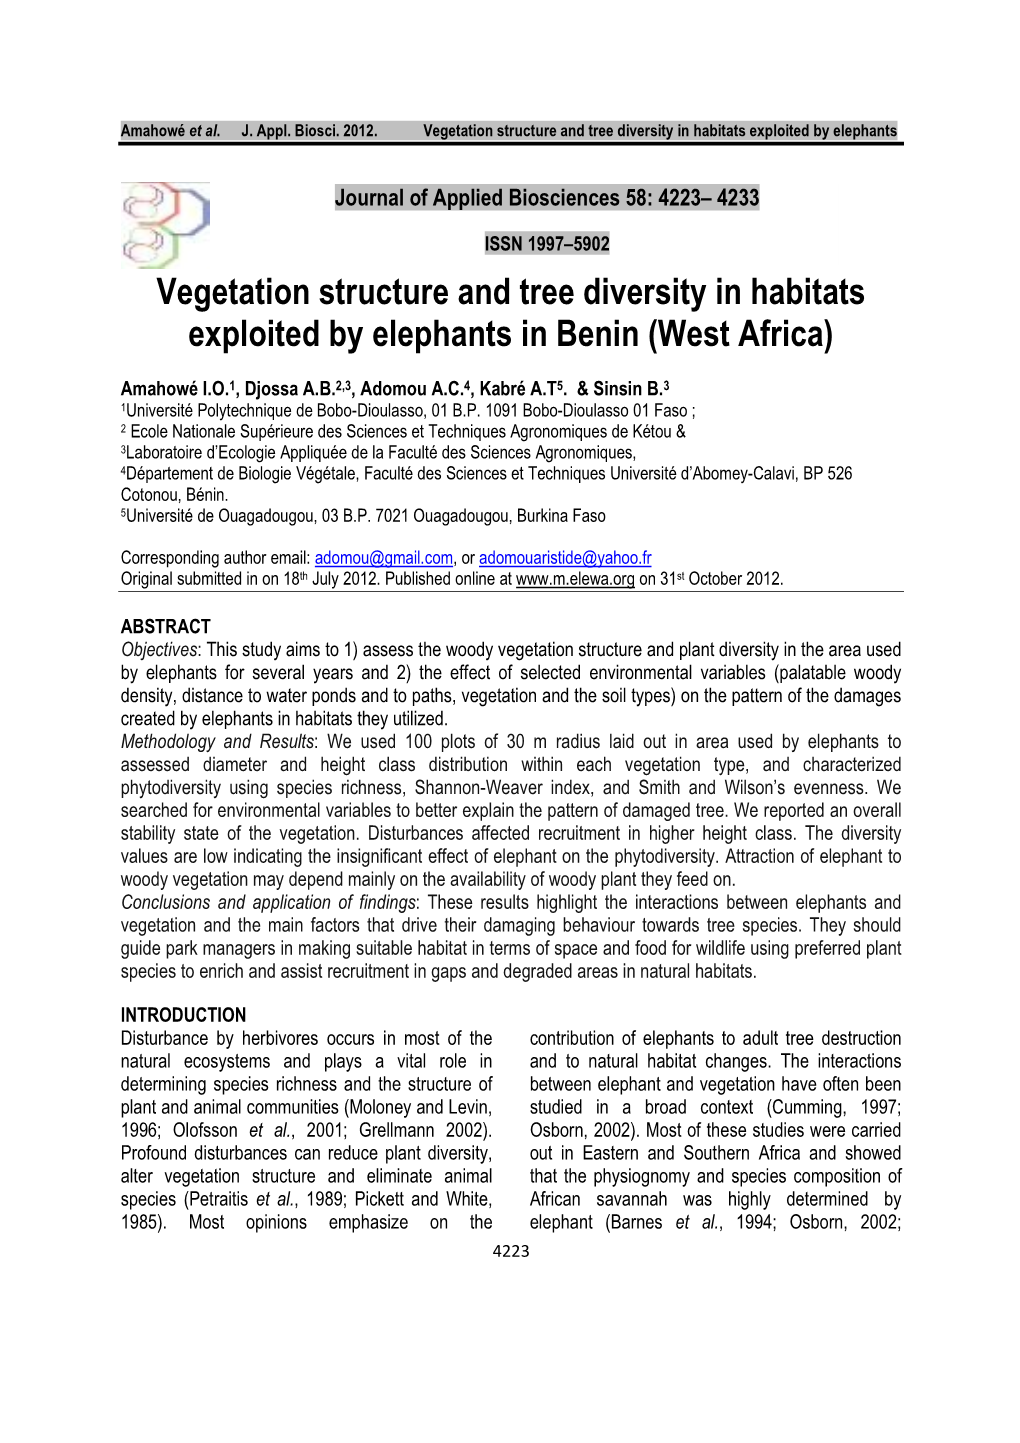 Vegetation Structure and Tree Diversity in Habitats Exploited By